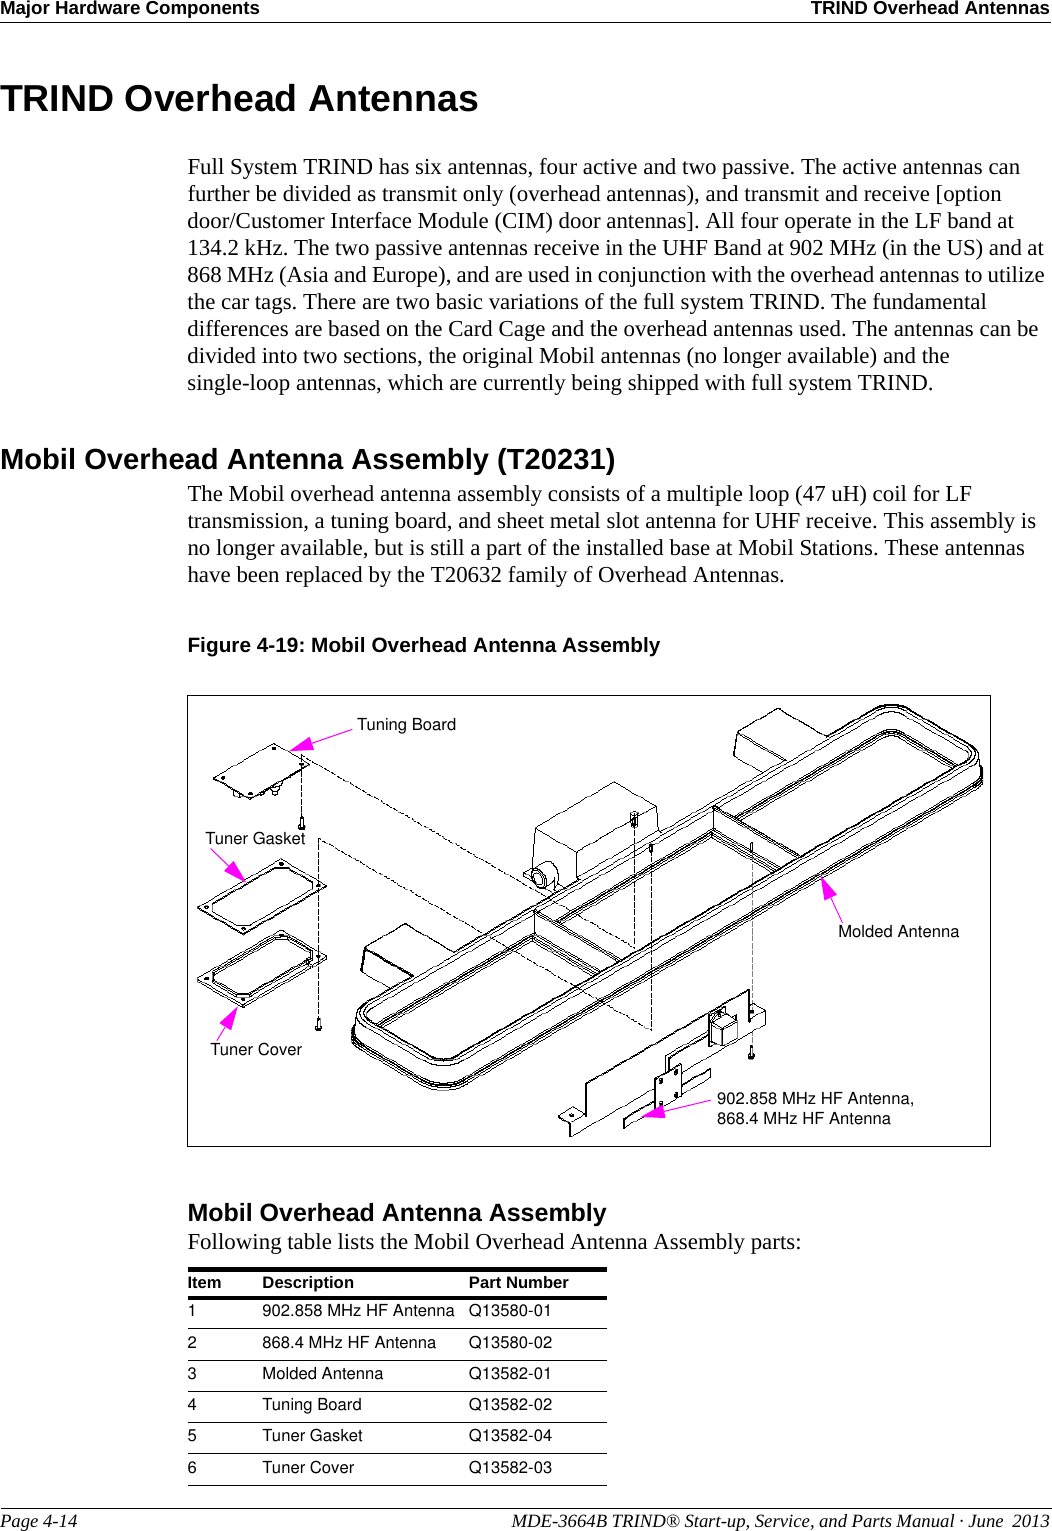 Major Hardware Components TRIND Overhead AntennasPage 4-14                                                                                                  MDE-3664B TRIND® Start-up, Service, and Parts Manual · June  2013TRIND Overhead AntennasFull System TRIND has six antennas, four active and two passive. The active antennas can further be divided as transmit only (overhead antennas), and transmit and receive [option door/Customer Interface Module (CIM) door antennas]. All four operate in the LF band at 134.2 kHz. The two passive antennas receive in the UHF Band at 902 MHz (in the US) and at 868 MHz (Asia and Europe), and are used in conjunction with the overhead antennas to utilize the car tags. There are two basic variations of the full system TRIND. The fundamental differences are based on the Card Cage and the overhead antennas used. The antennas can be divided into two sections, the original Mobil antennas (no longer available) and the single-loop antennas, which are currently being shipped with full system TRIND.Mobil Overhead Antenna Assembly (T20231)The Mobil overhead antenna assembly consists of a multiple loop (47 uH) coil for LF transmission, a tuning board, and sheet metal slot antenna for UHF receive. This assembly is no longer available, but is still a part of the installed base at Mobil Stations. These antennas have been replaced by the T20632 family of Overhead Antennas.Figure 4-19: Mobil Overhead Antenna AssemblyTuner GasketTuner CoverTuning BoardMolded Antenna902.858 MHz HF Antenna, 868.4 MHz HF AntennaMobil Overhead Antenna AssemblyFollowing table lists the Mobil Overhead Antenna Assembly parts:Item Description Part Number1902.858 MHz HF Antenna Q13580-012868.4 MHz HF Antenna Q13580-023Molded Antenna Q13582-014Tuning Board Q13582-025Tuner Gasket Q13582-046Tuner Cover Q13582-03